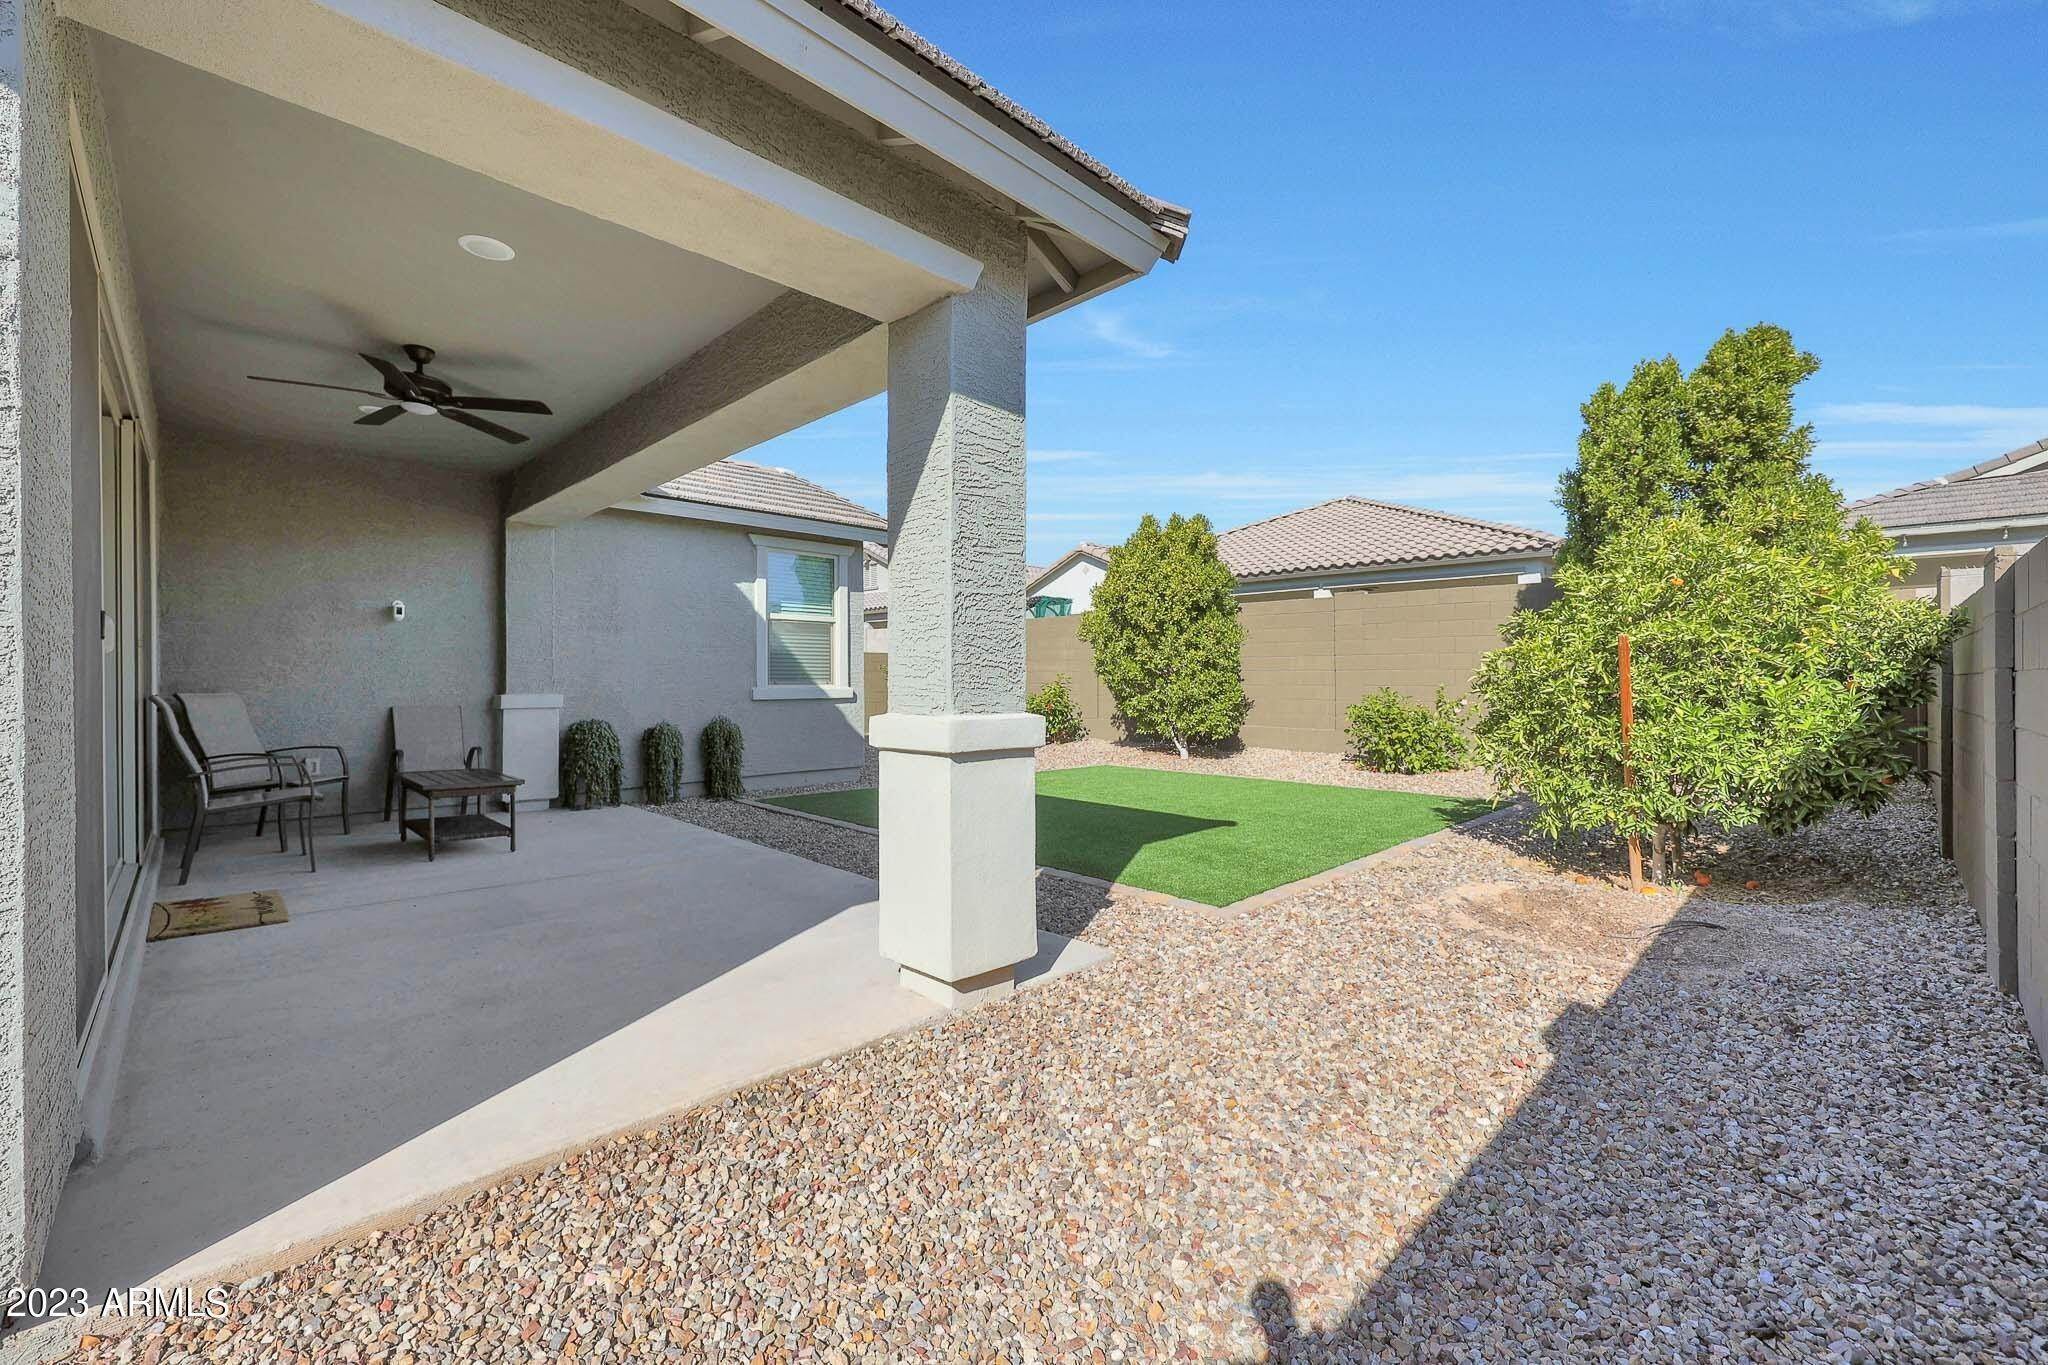 23. Single Family for Sale at Goodyear, AZ 85338